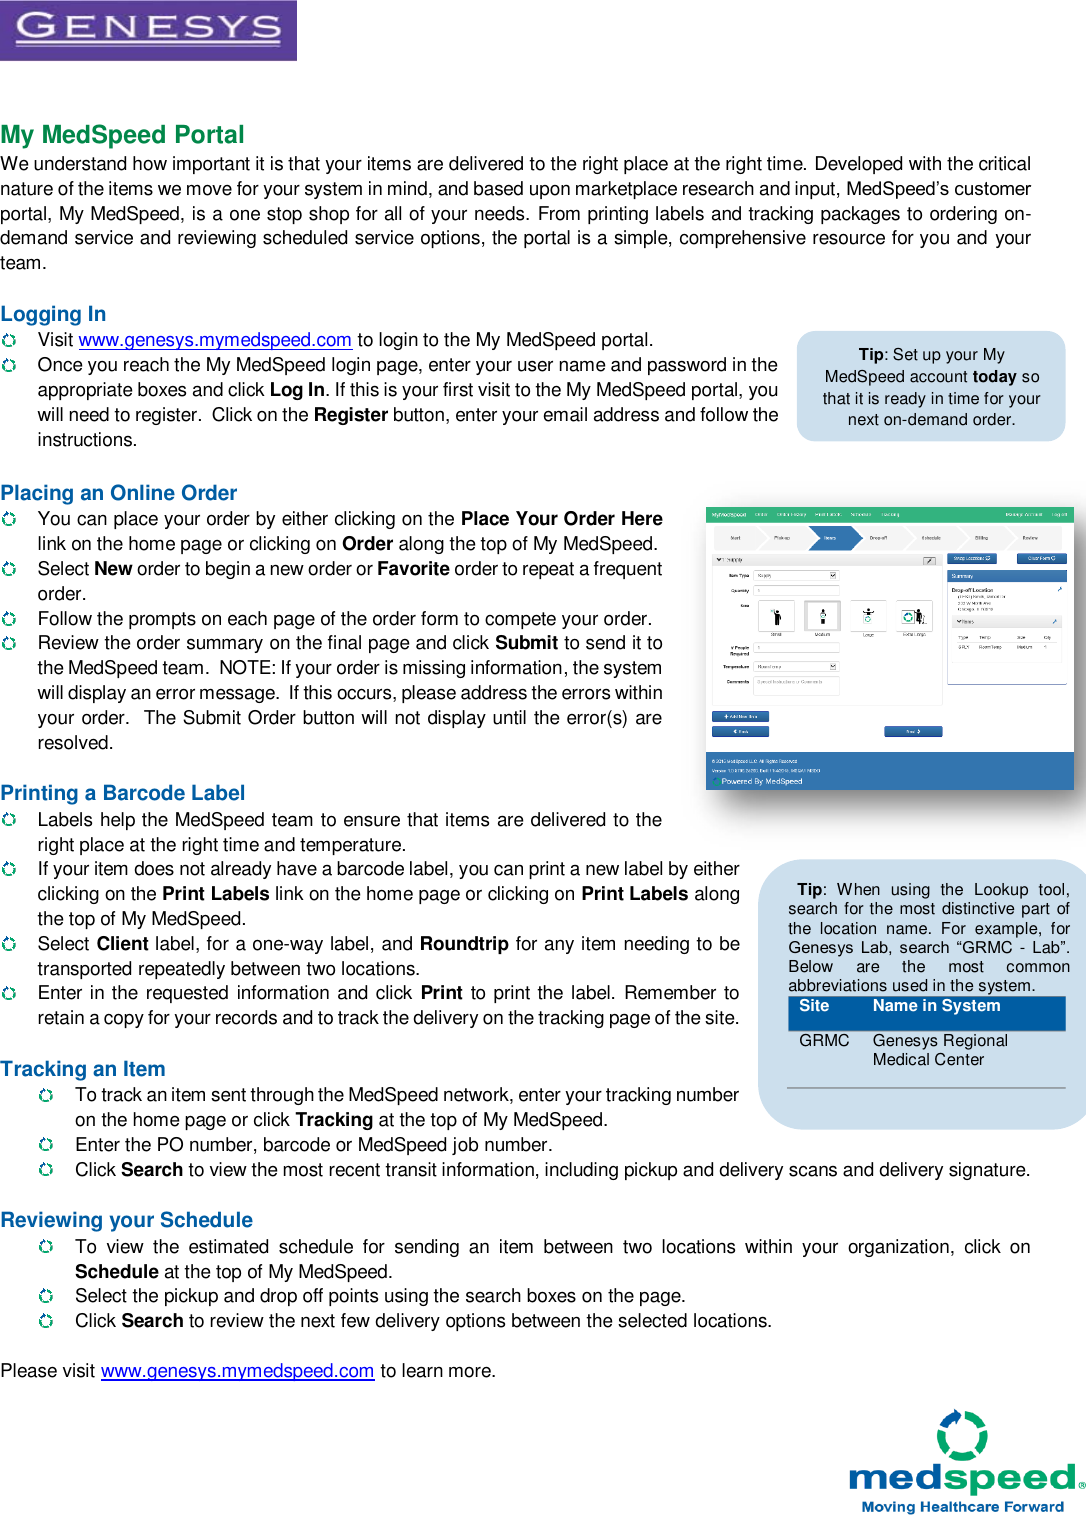 Page 2 of 2 - Genesys User Guide